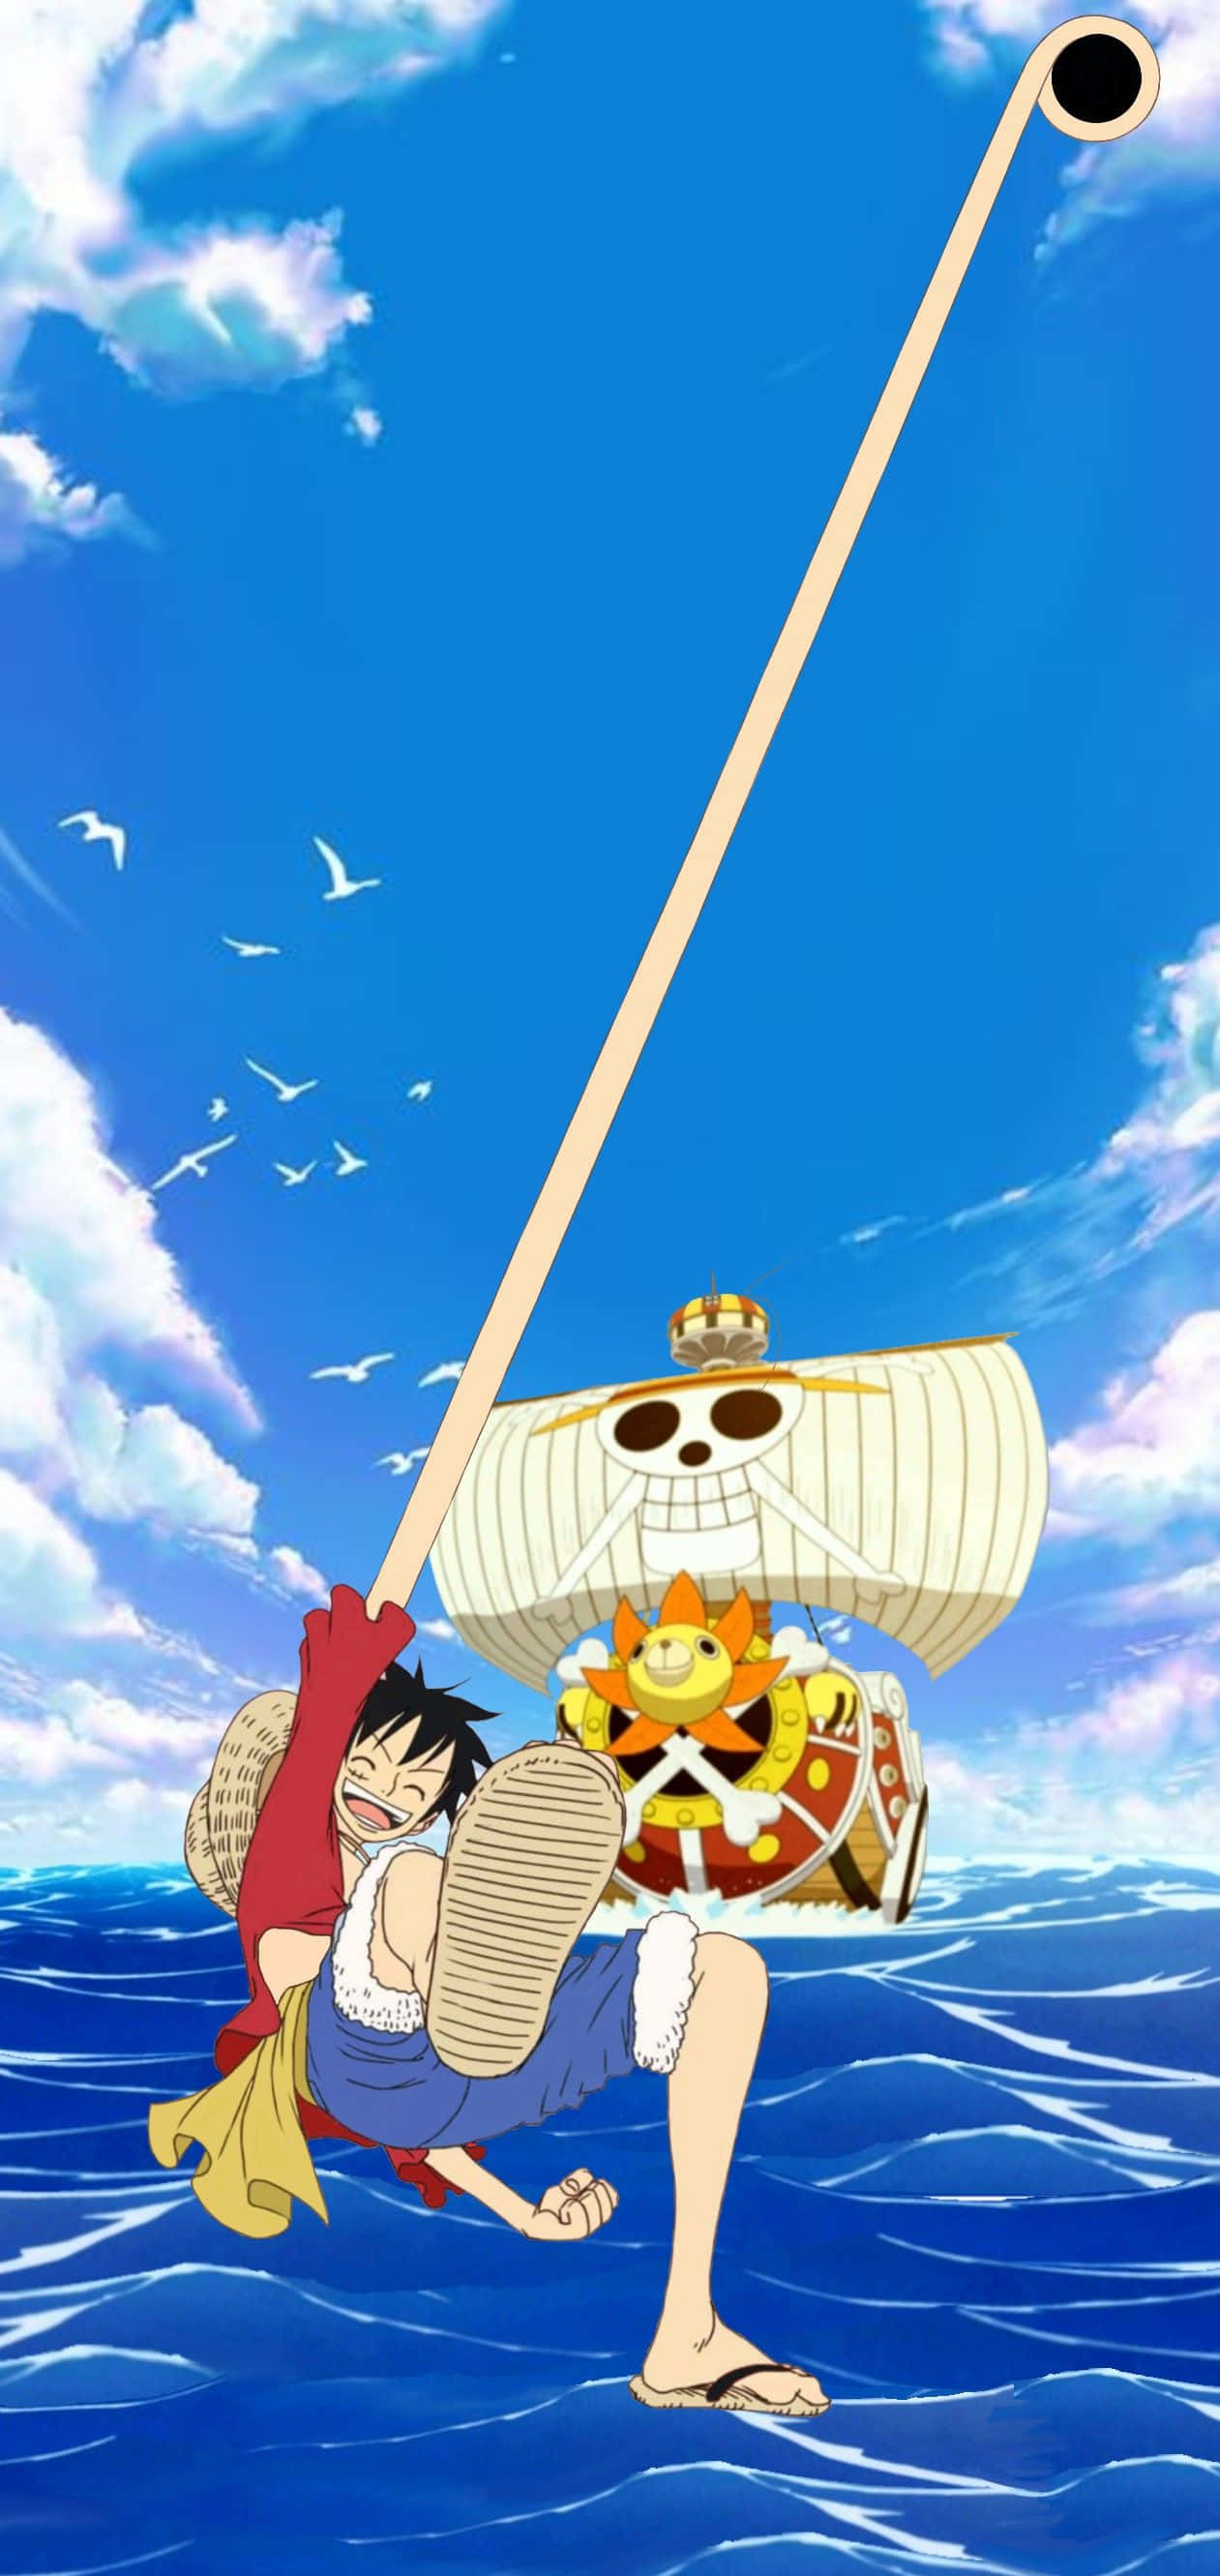 Going Merry  One piece wallpaper iphone, One piece world, One